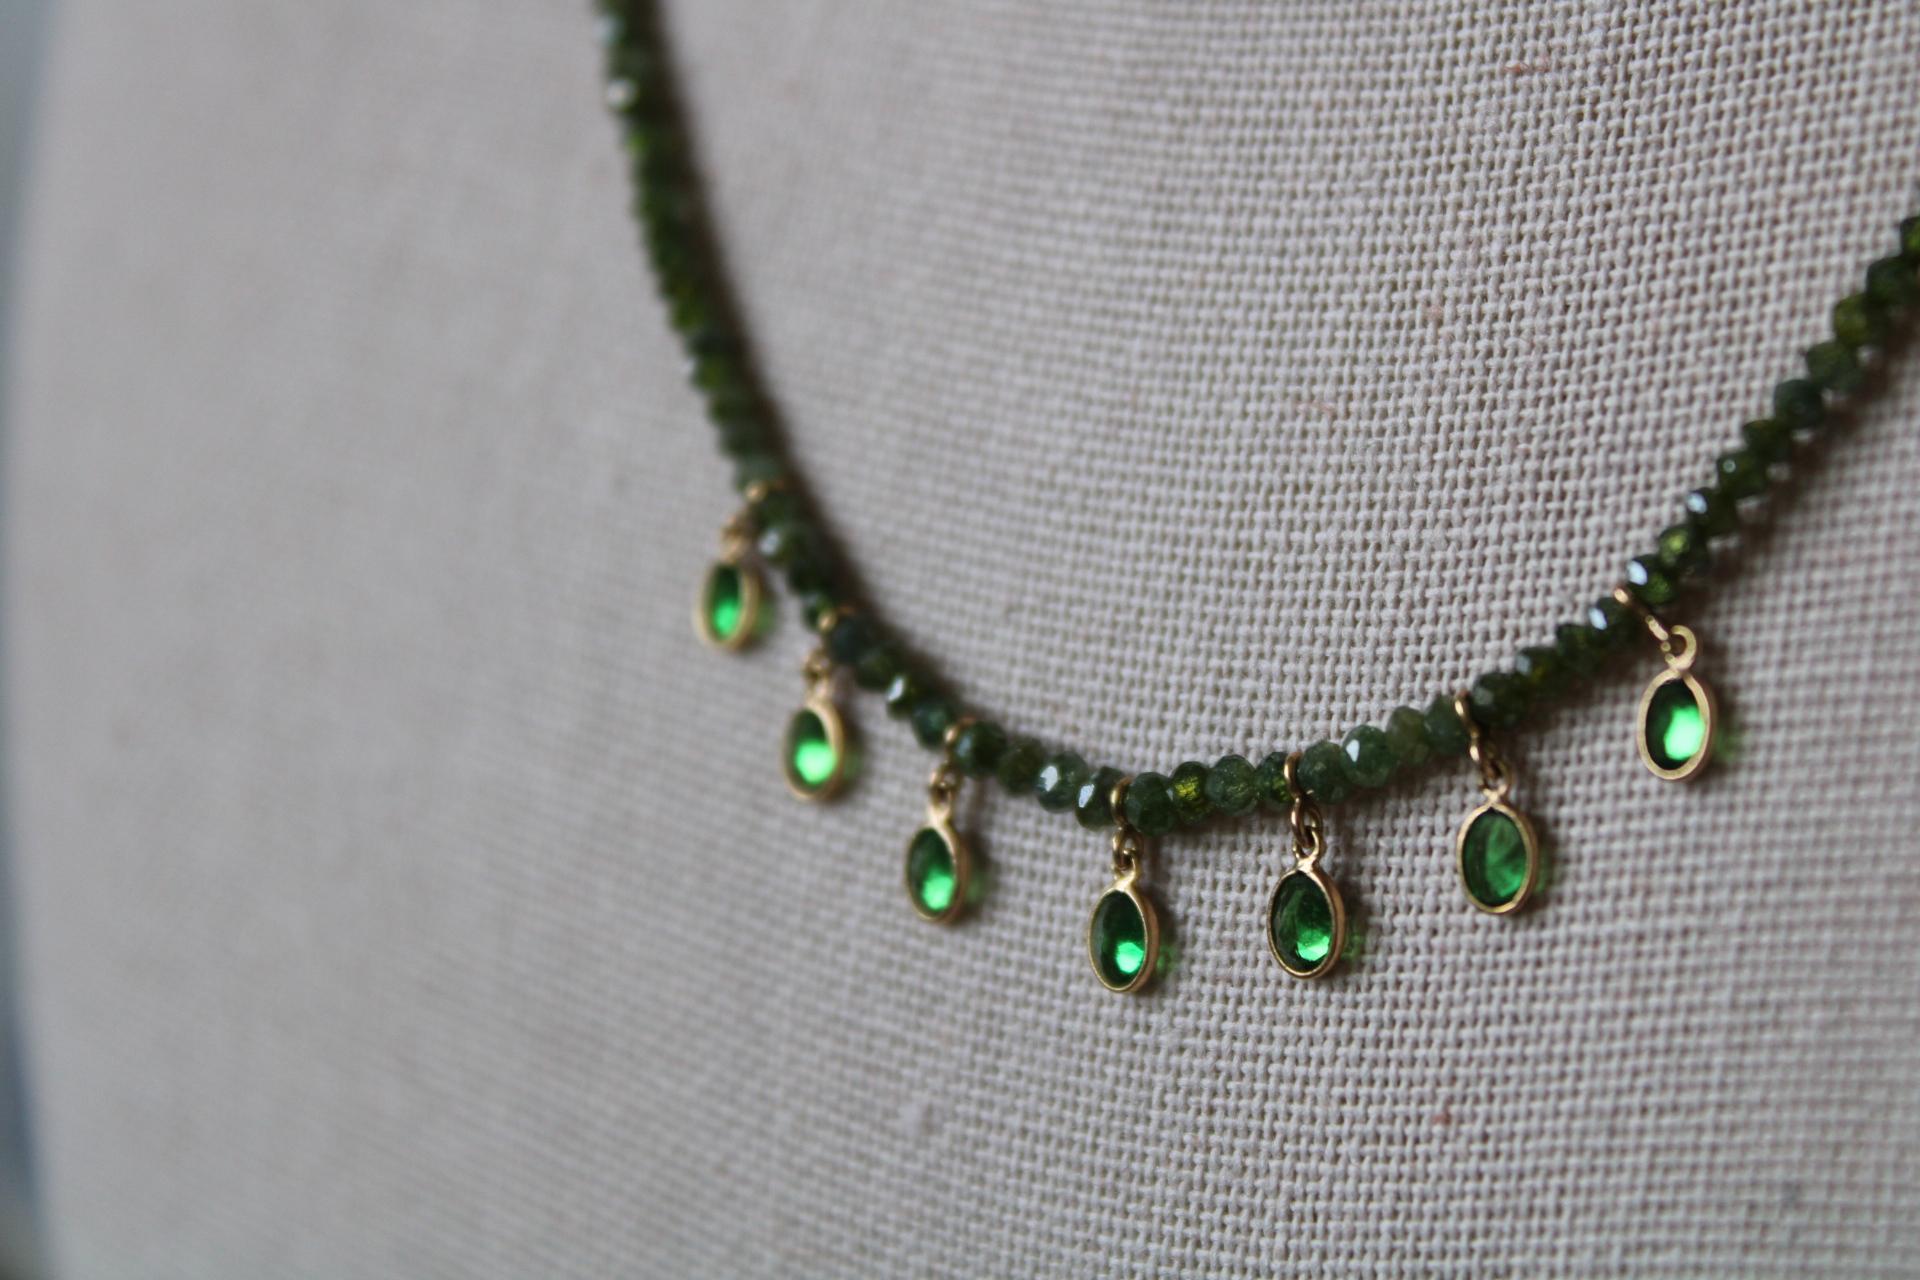 17.22 Carat Diamond Bead Chain in 18K Gold with Tsavorite Pears For Sale 2